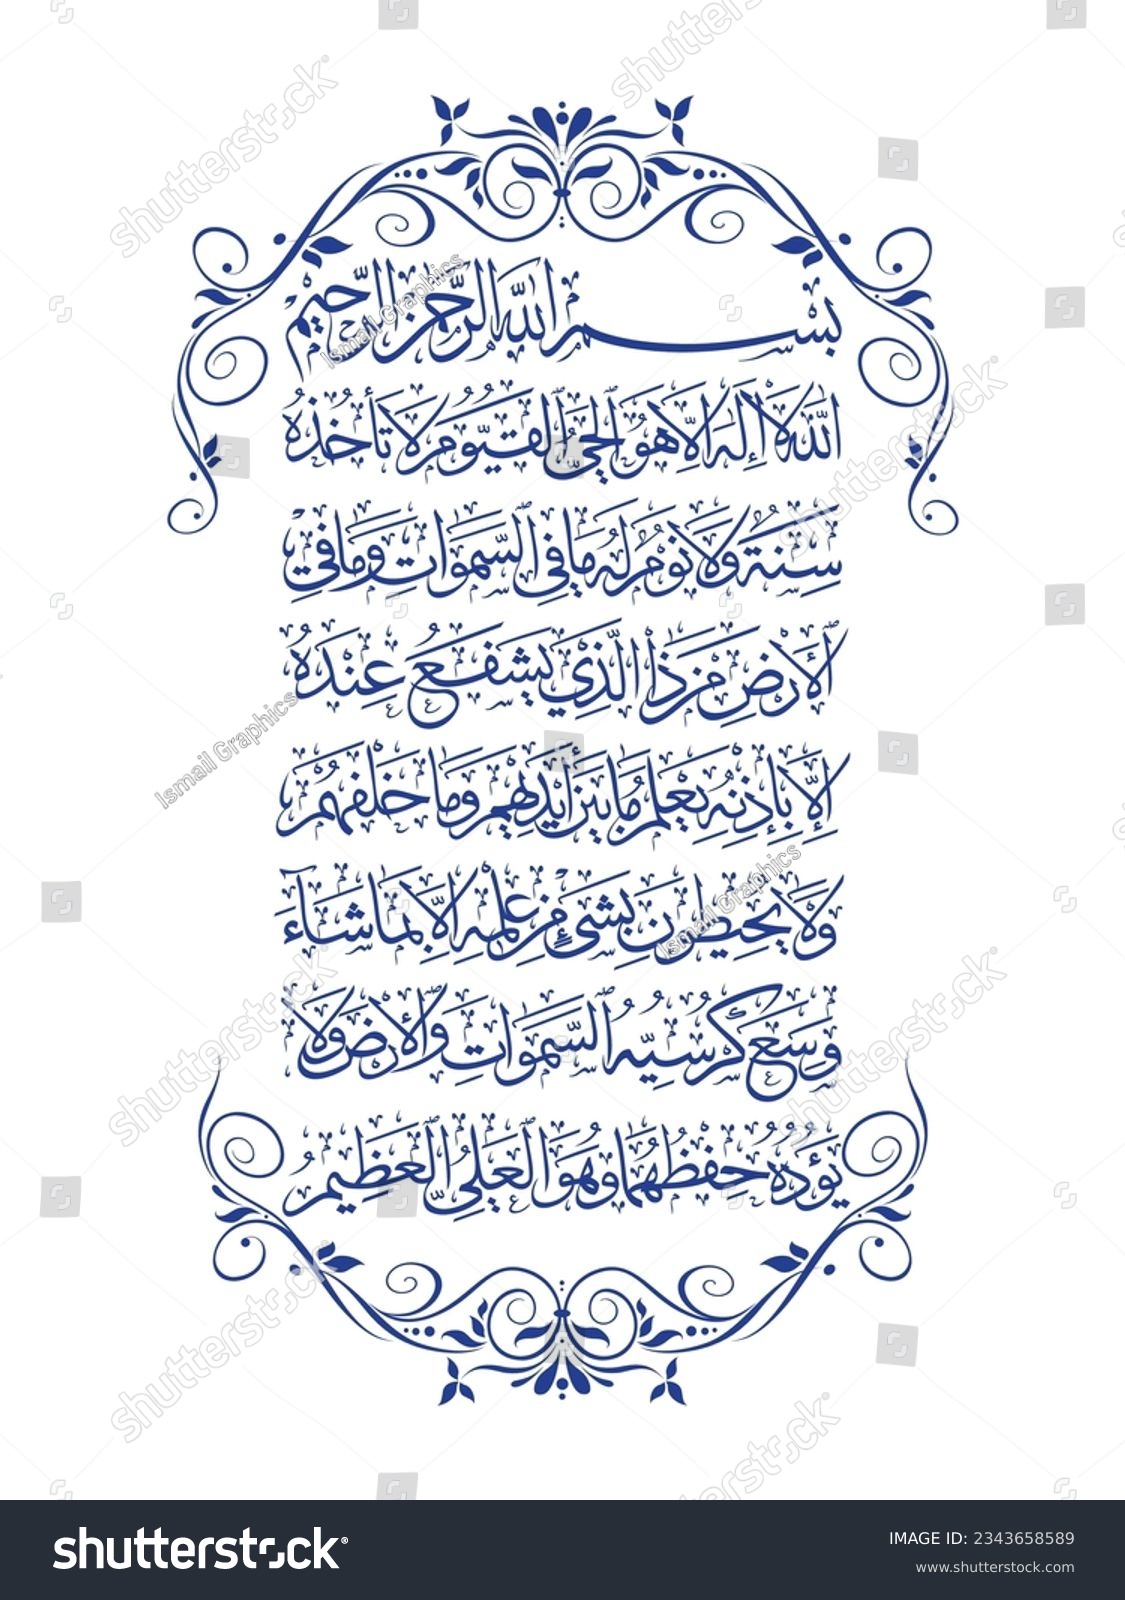 SVG of Ayatul KursiVerse of The Throne (Al-Quran Chapter 2Sura Al-Baqarah verse 255). Muslims usually read the verse after every 5 times prayer and when they seeking for God's protection and help. svg